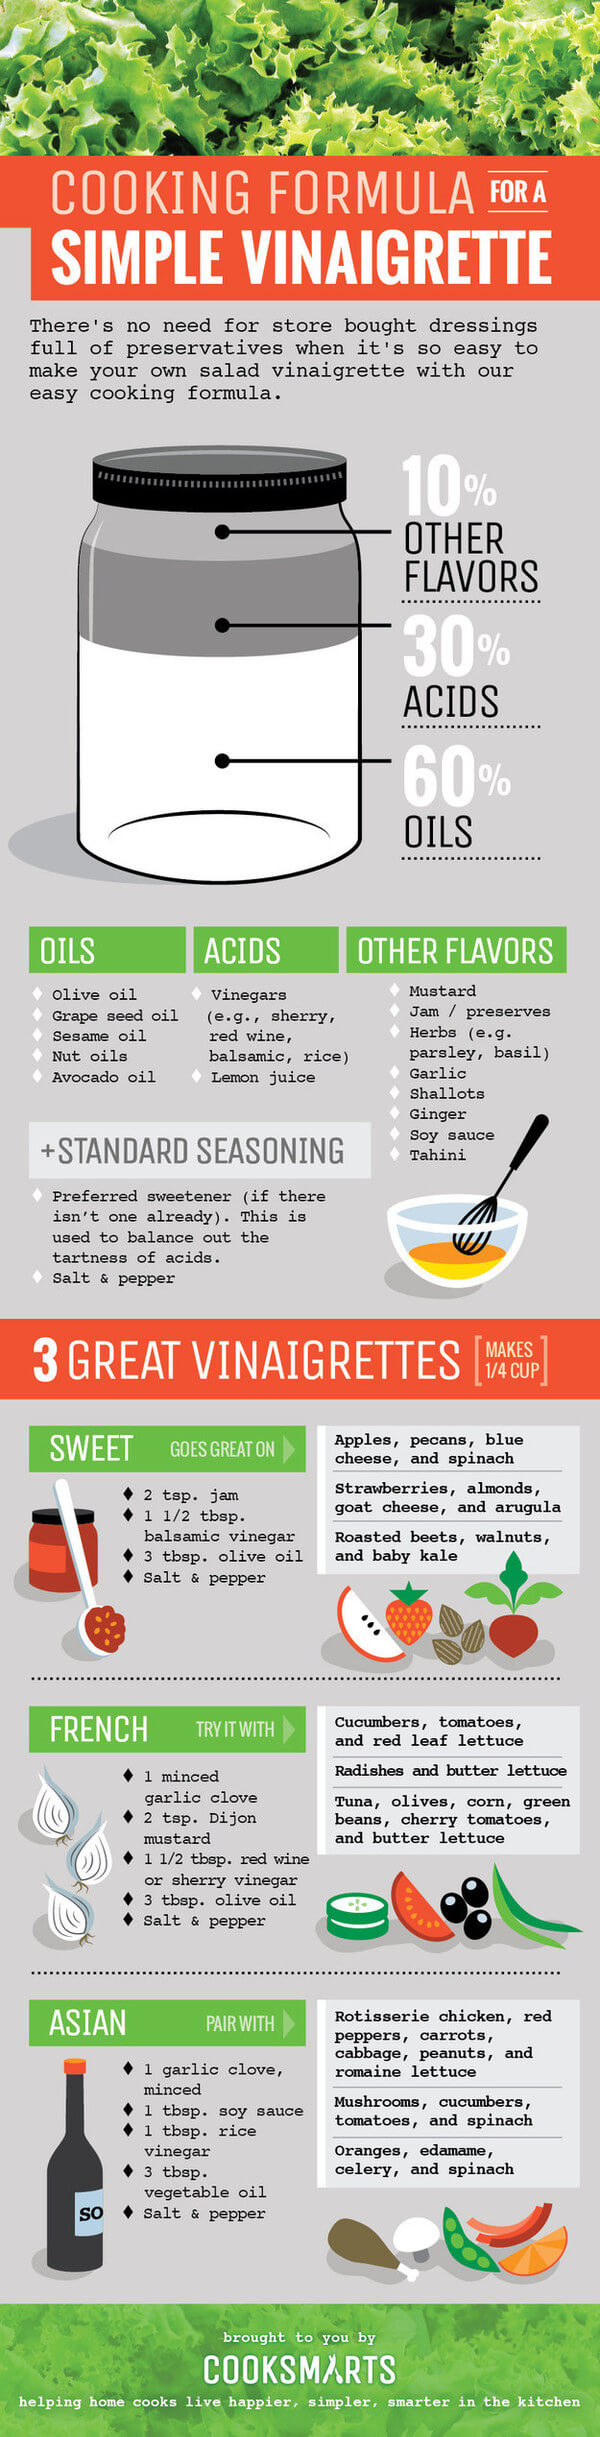 info-graphics for better cooking 2